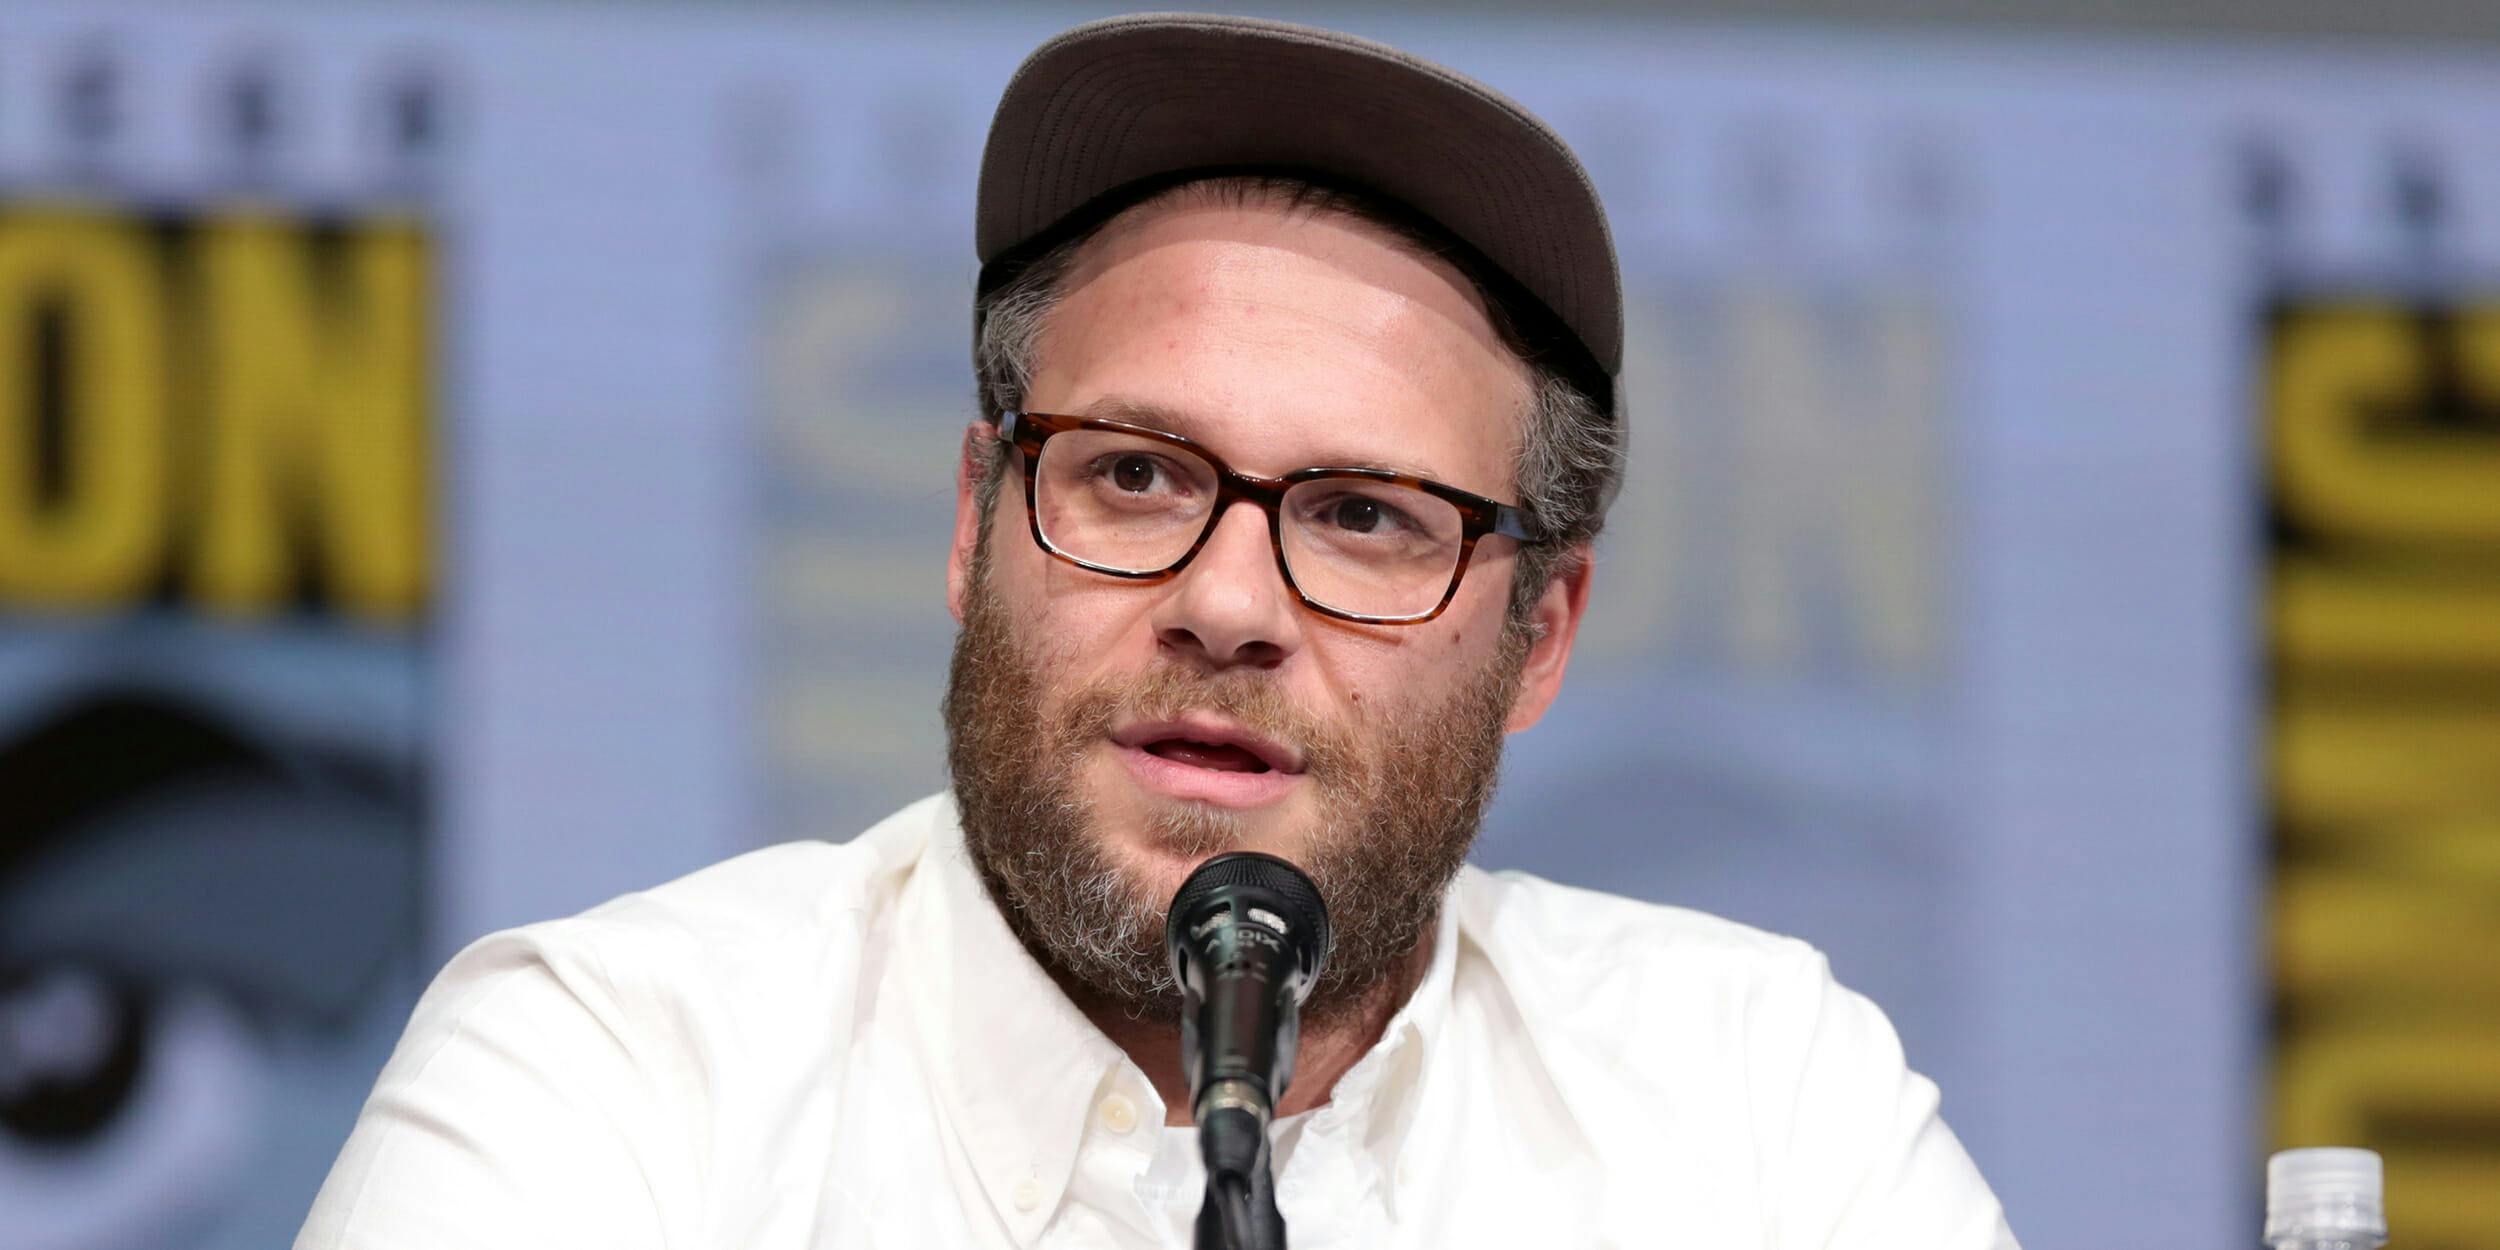 Seth Rogen Calls Out Ron Paul for Tweeting Racist Cartoon